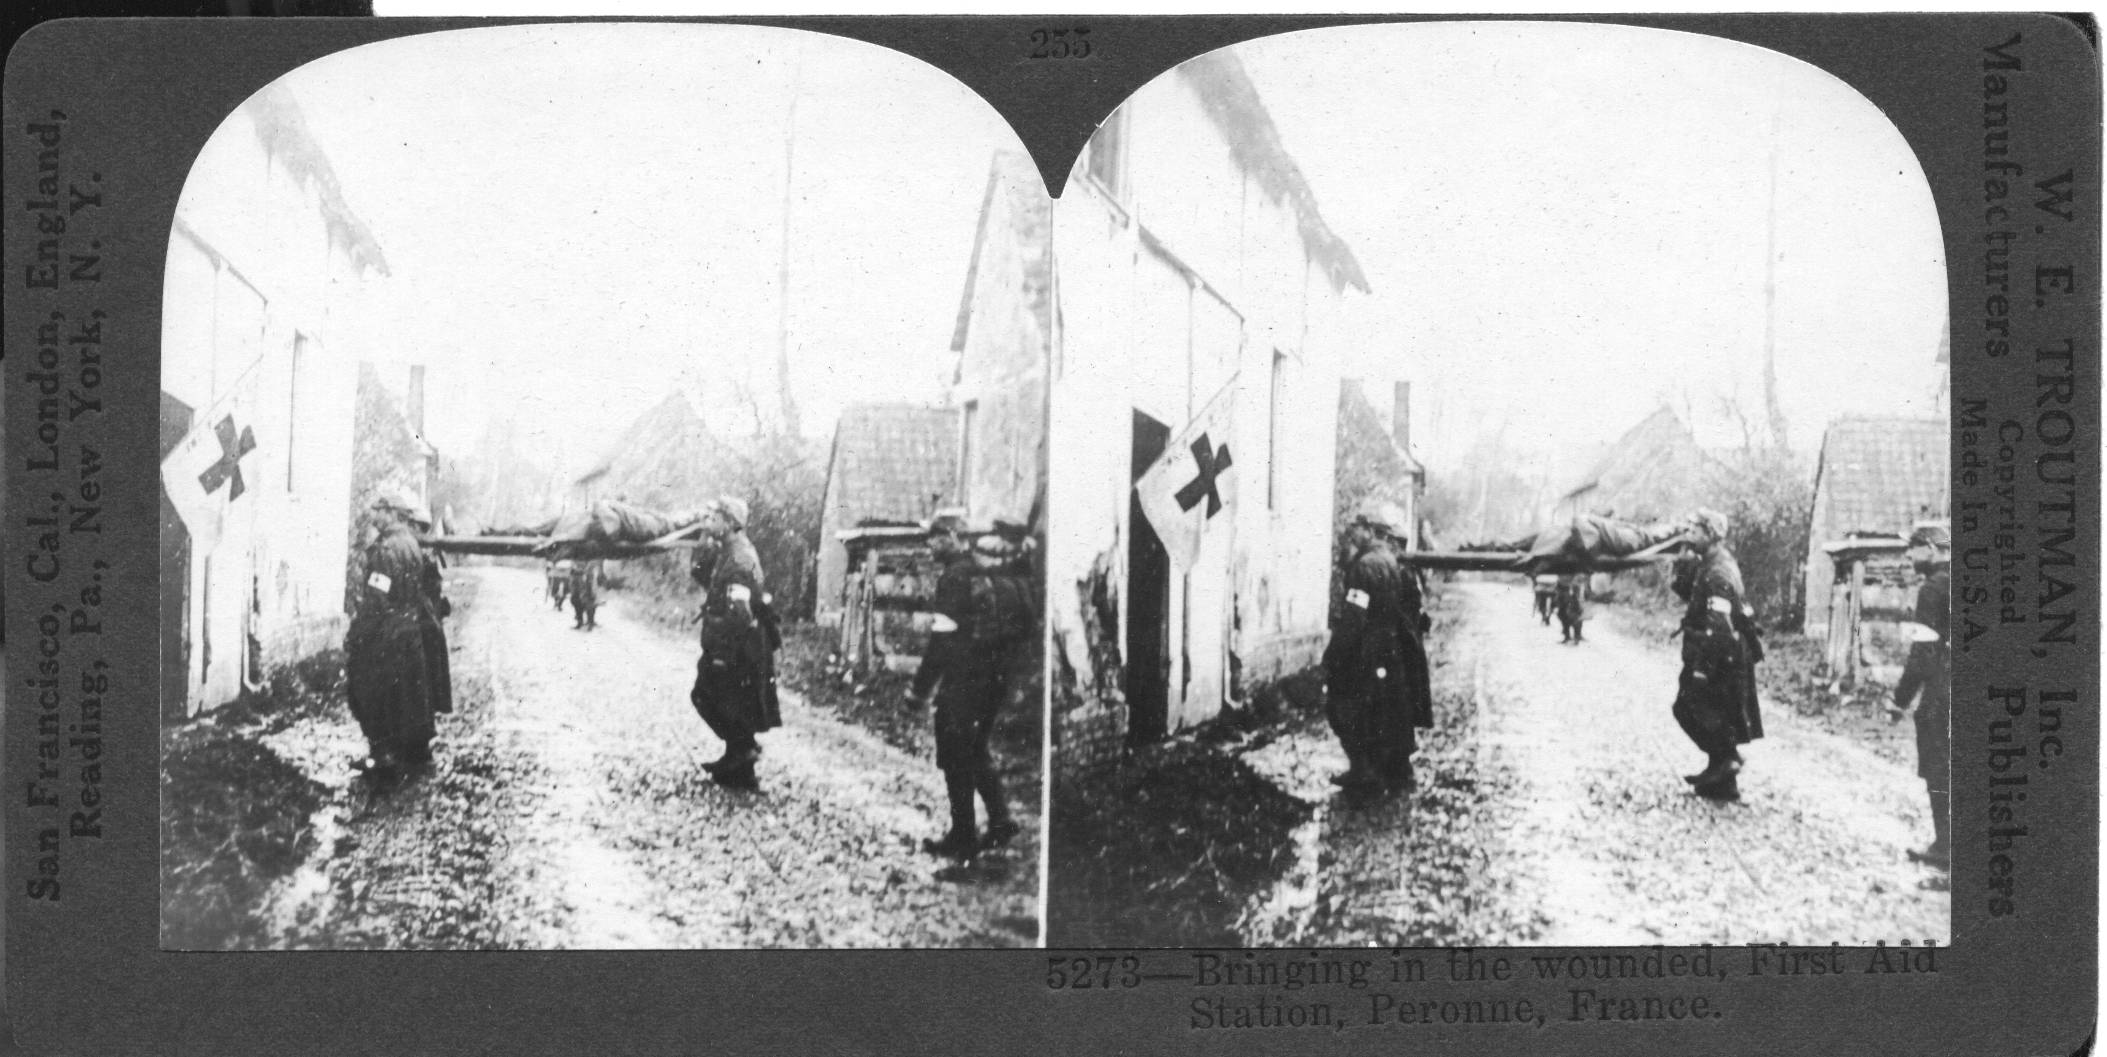 Bringing in the wounded, First Aid Station, Peronne, France